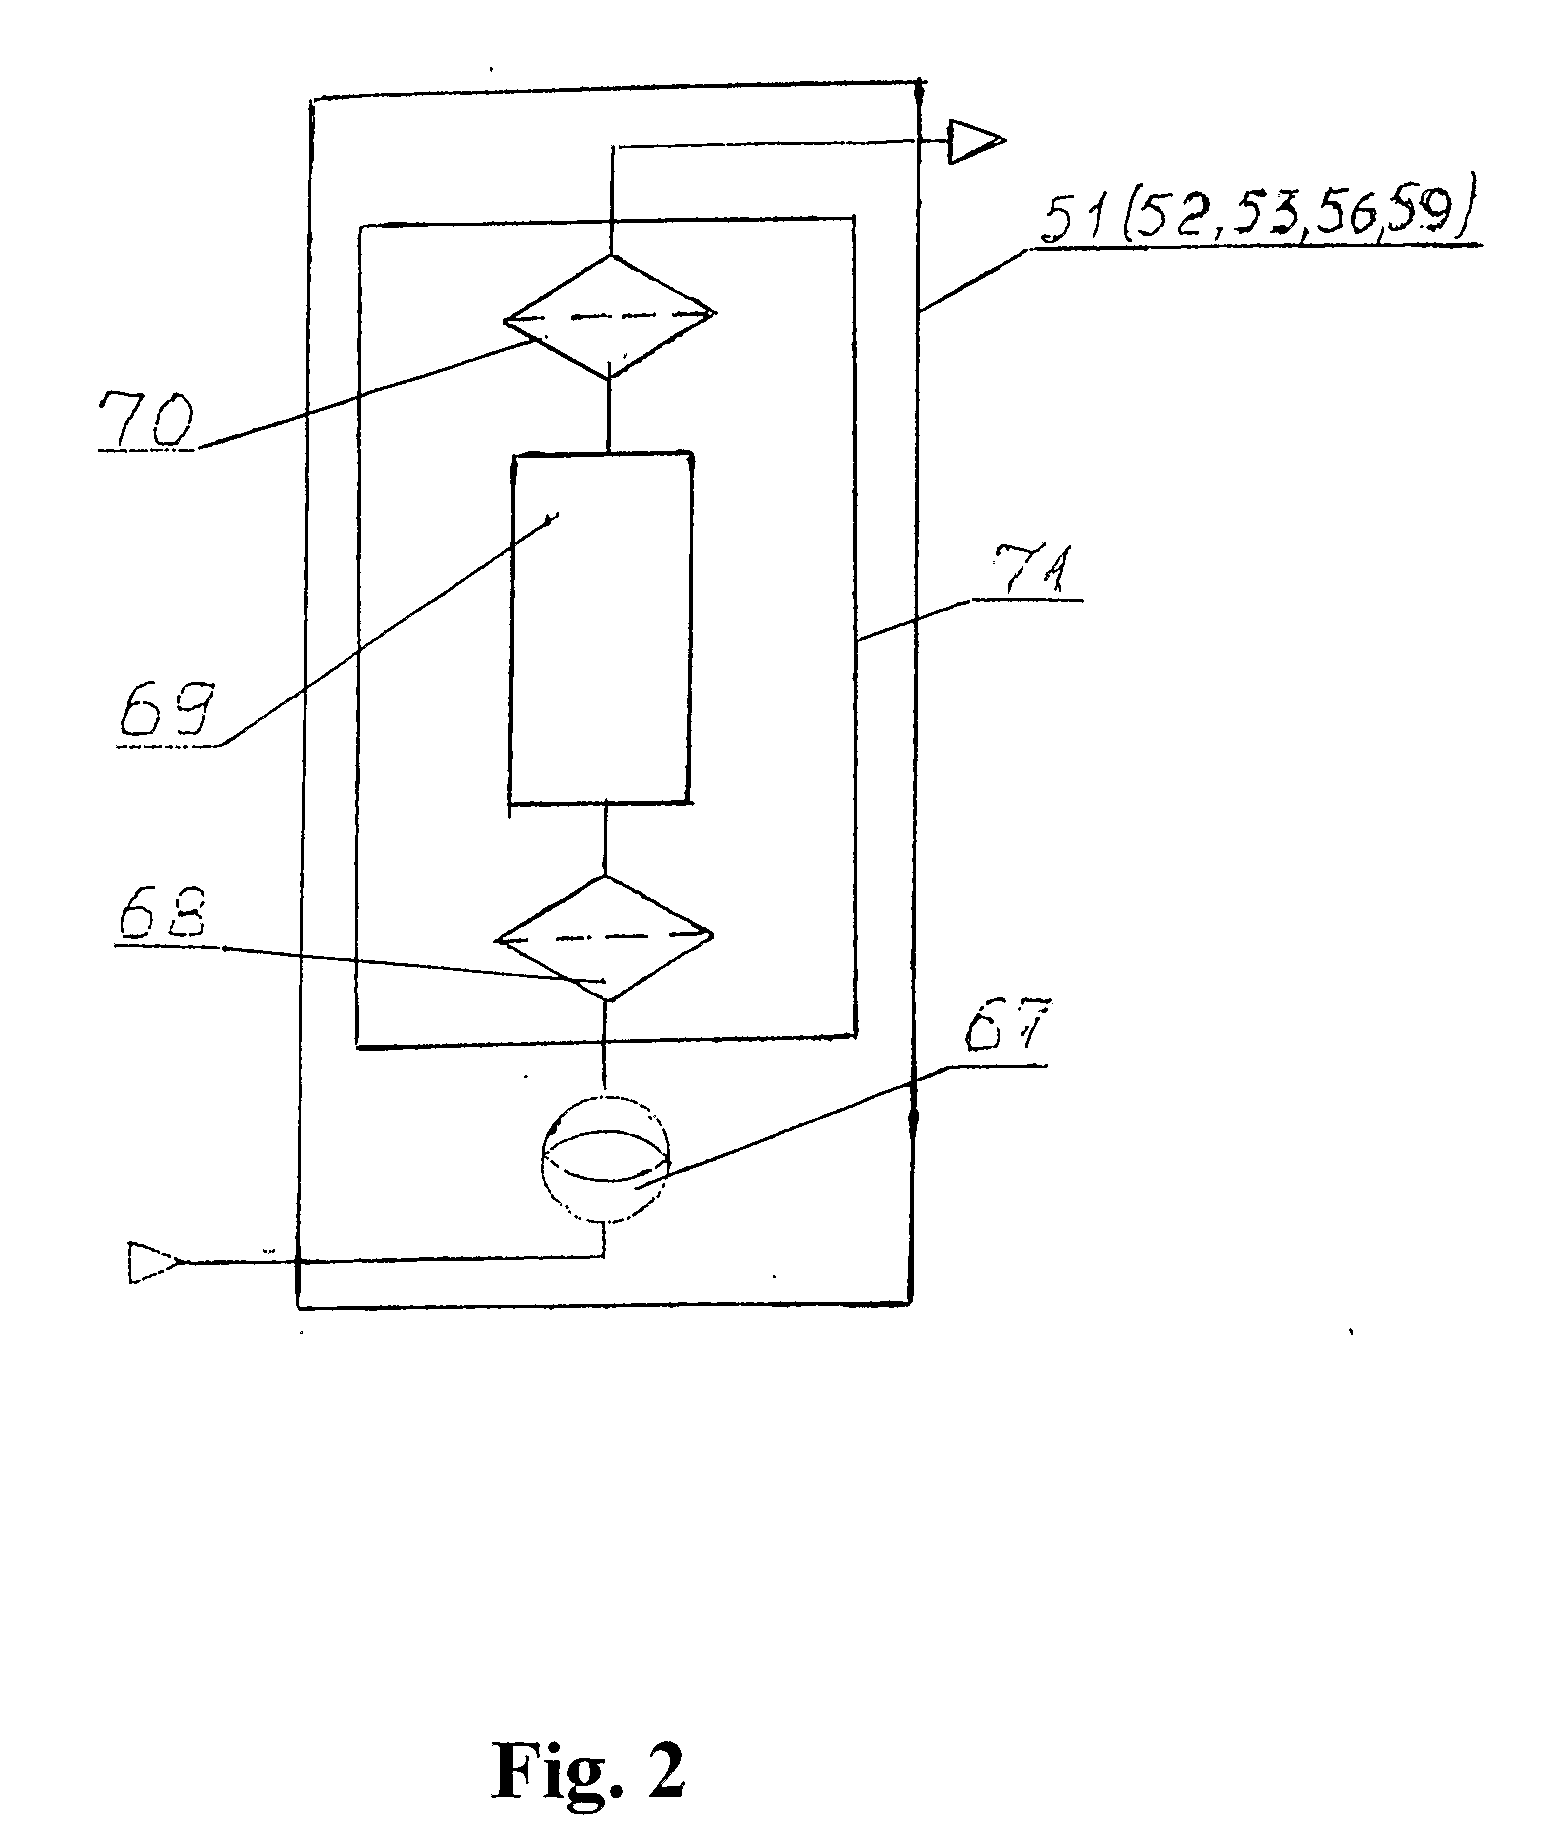 Method for Purifying and Separating a Krypton-Xenon Mixture by Rectification and a Device for Carrying Out Said Method